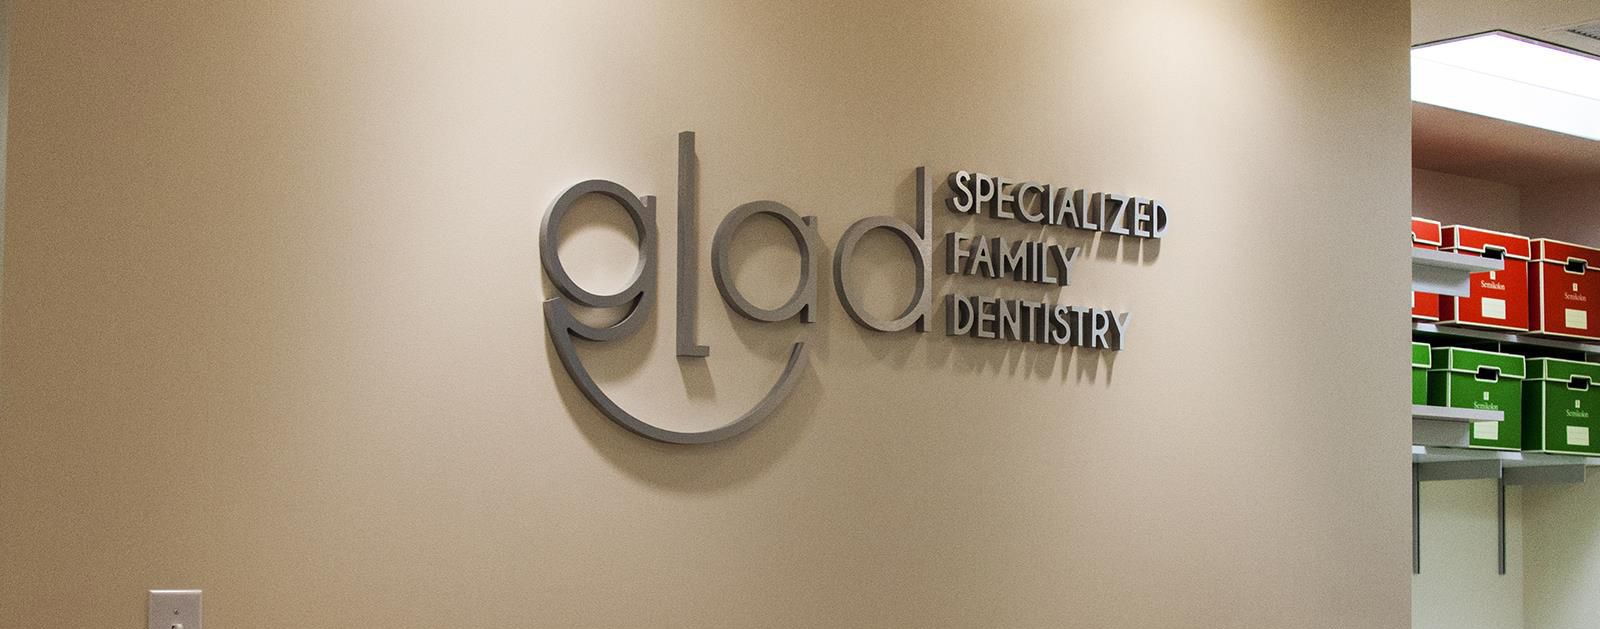 Glad Dentistry logo on the office